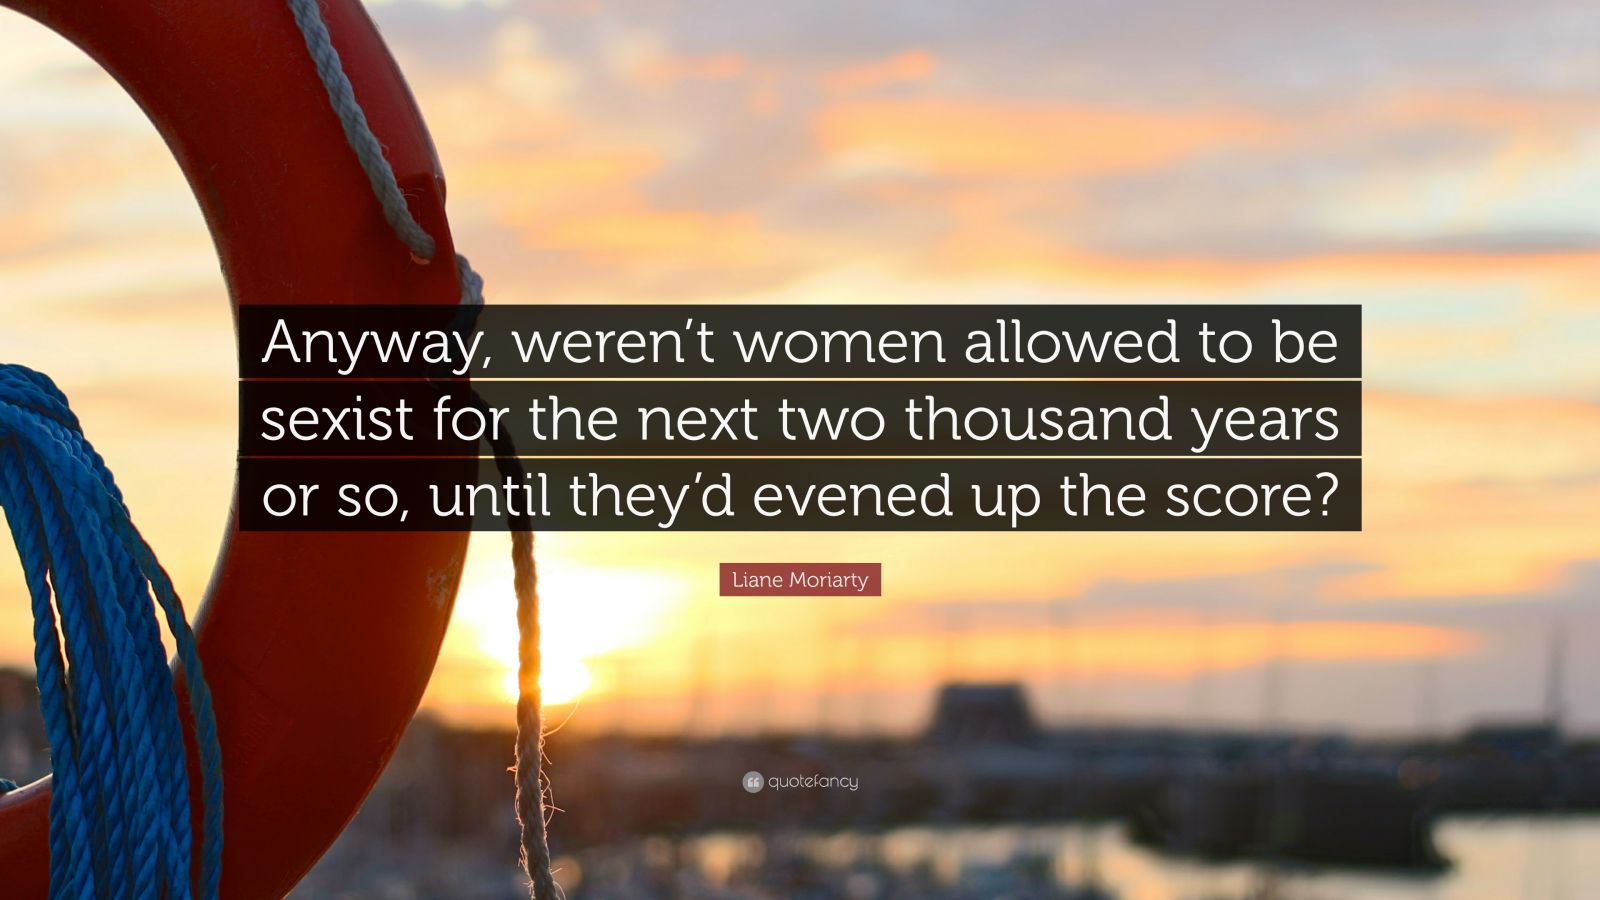 Liane Moriarty Quote: “Anyway, weren’t women allowed to be sexist for ...